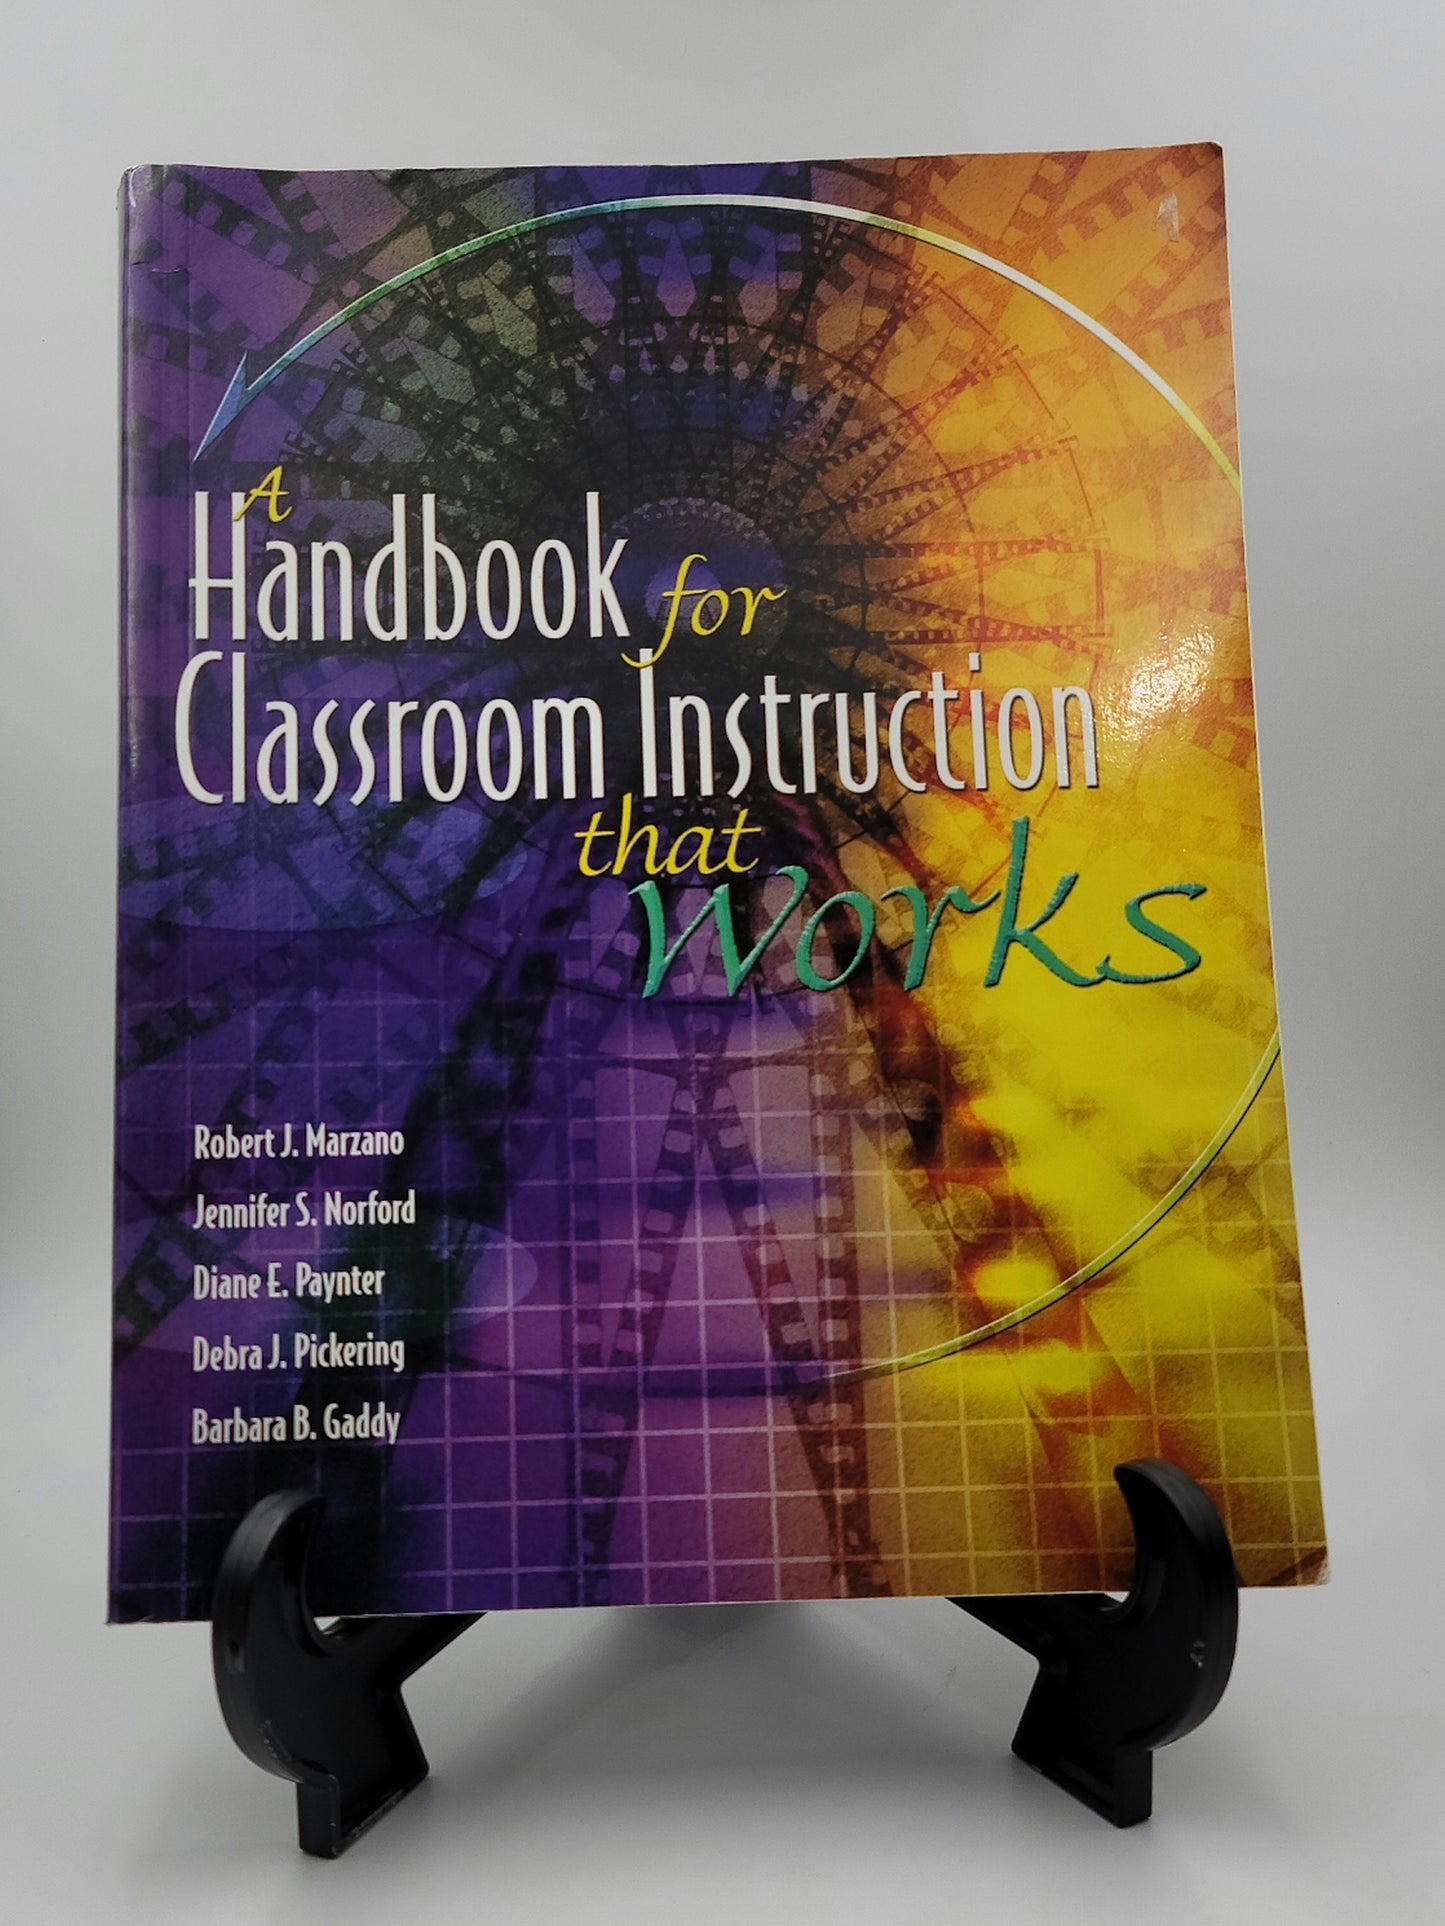 A Handbook for Classroom Instruction that Works by Robert J. Marzano et. al.